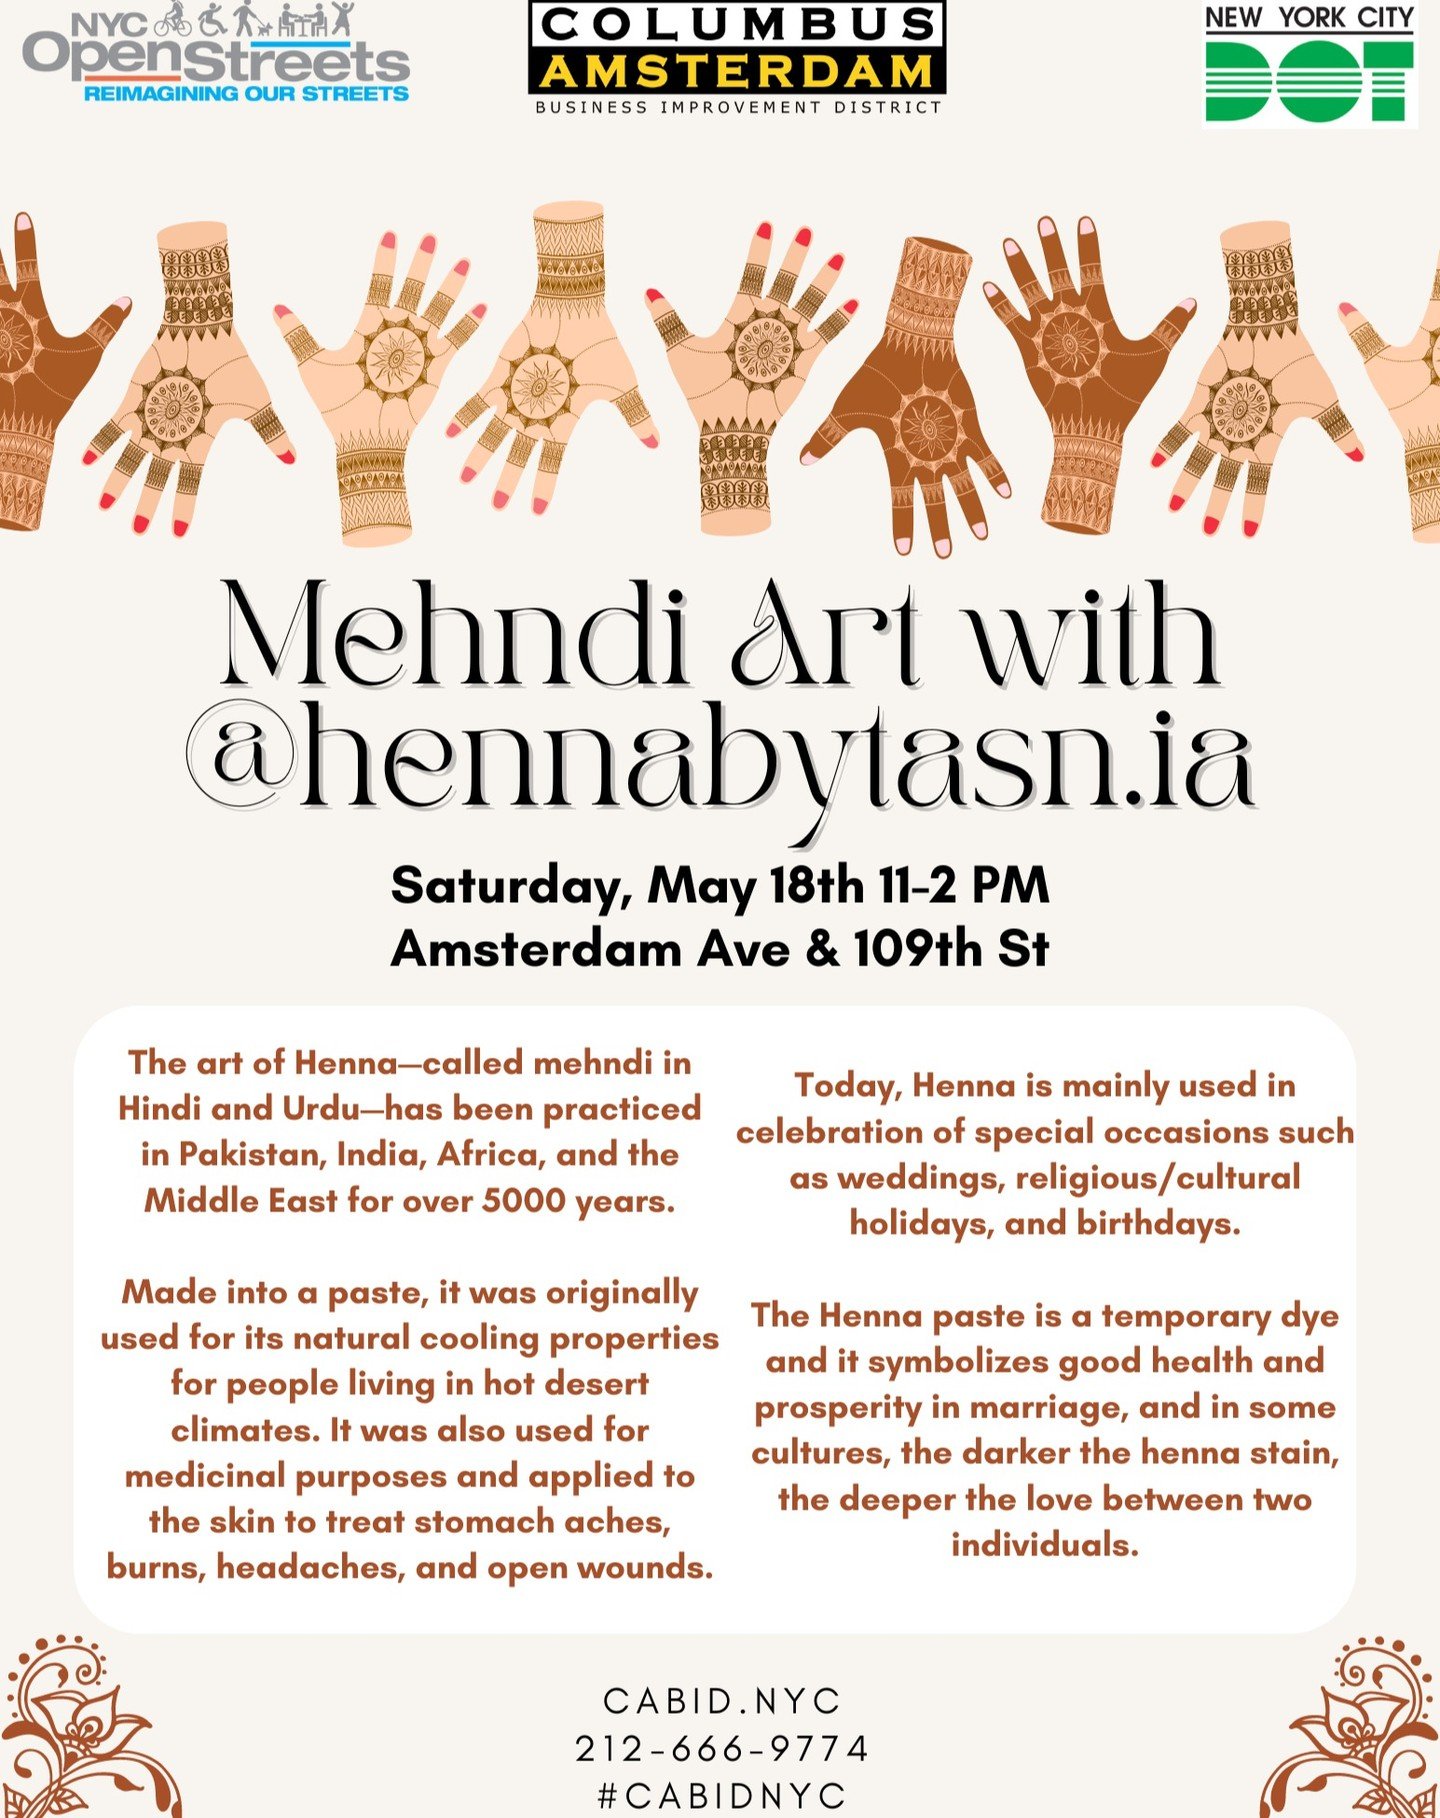 We are excited to bring our favorite neighborhood Henna artist, @hennabytasn.ia , back to Open Streets this month! Come by this Saturday, May 18 from 11-2 PM to check her out 🌞
-
-
-
#upperwestside #uws #openstreetsnyc #openstreets #nyc #cabidnyc #c